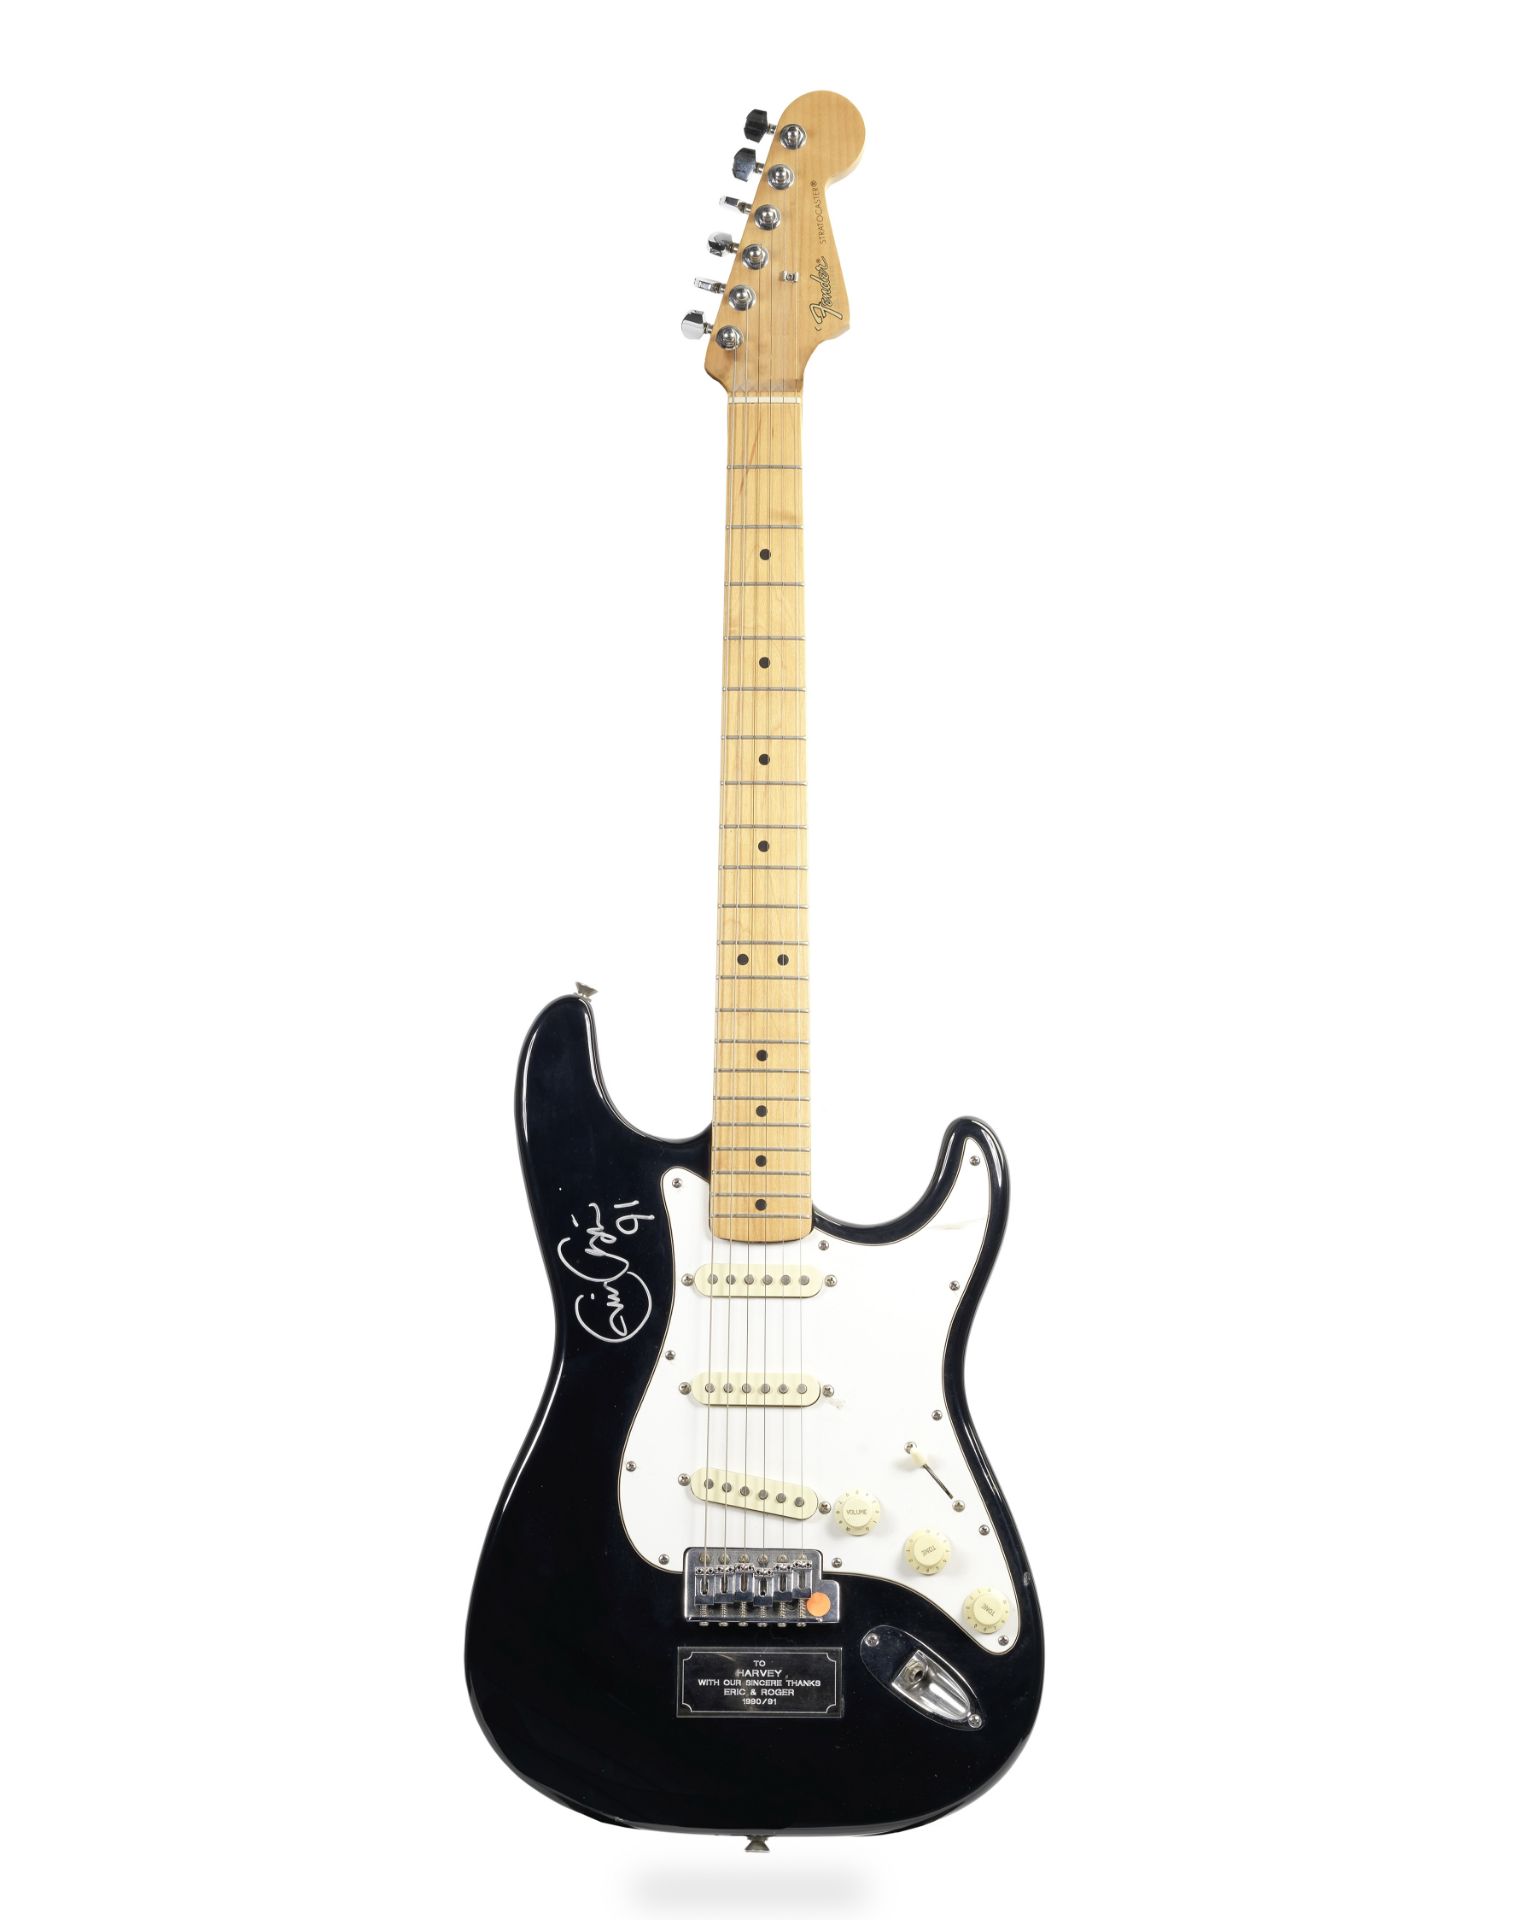 Eric Clapton: A Custom Limited Edition Fender Stratocaster,